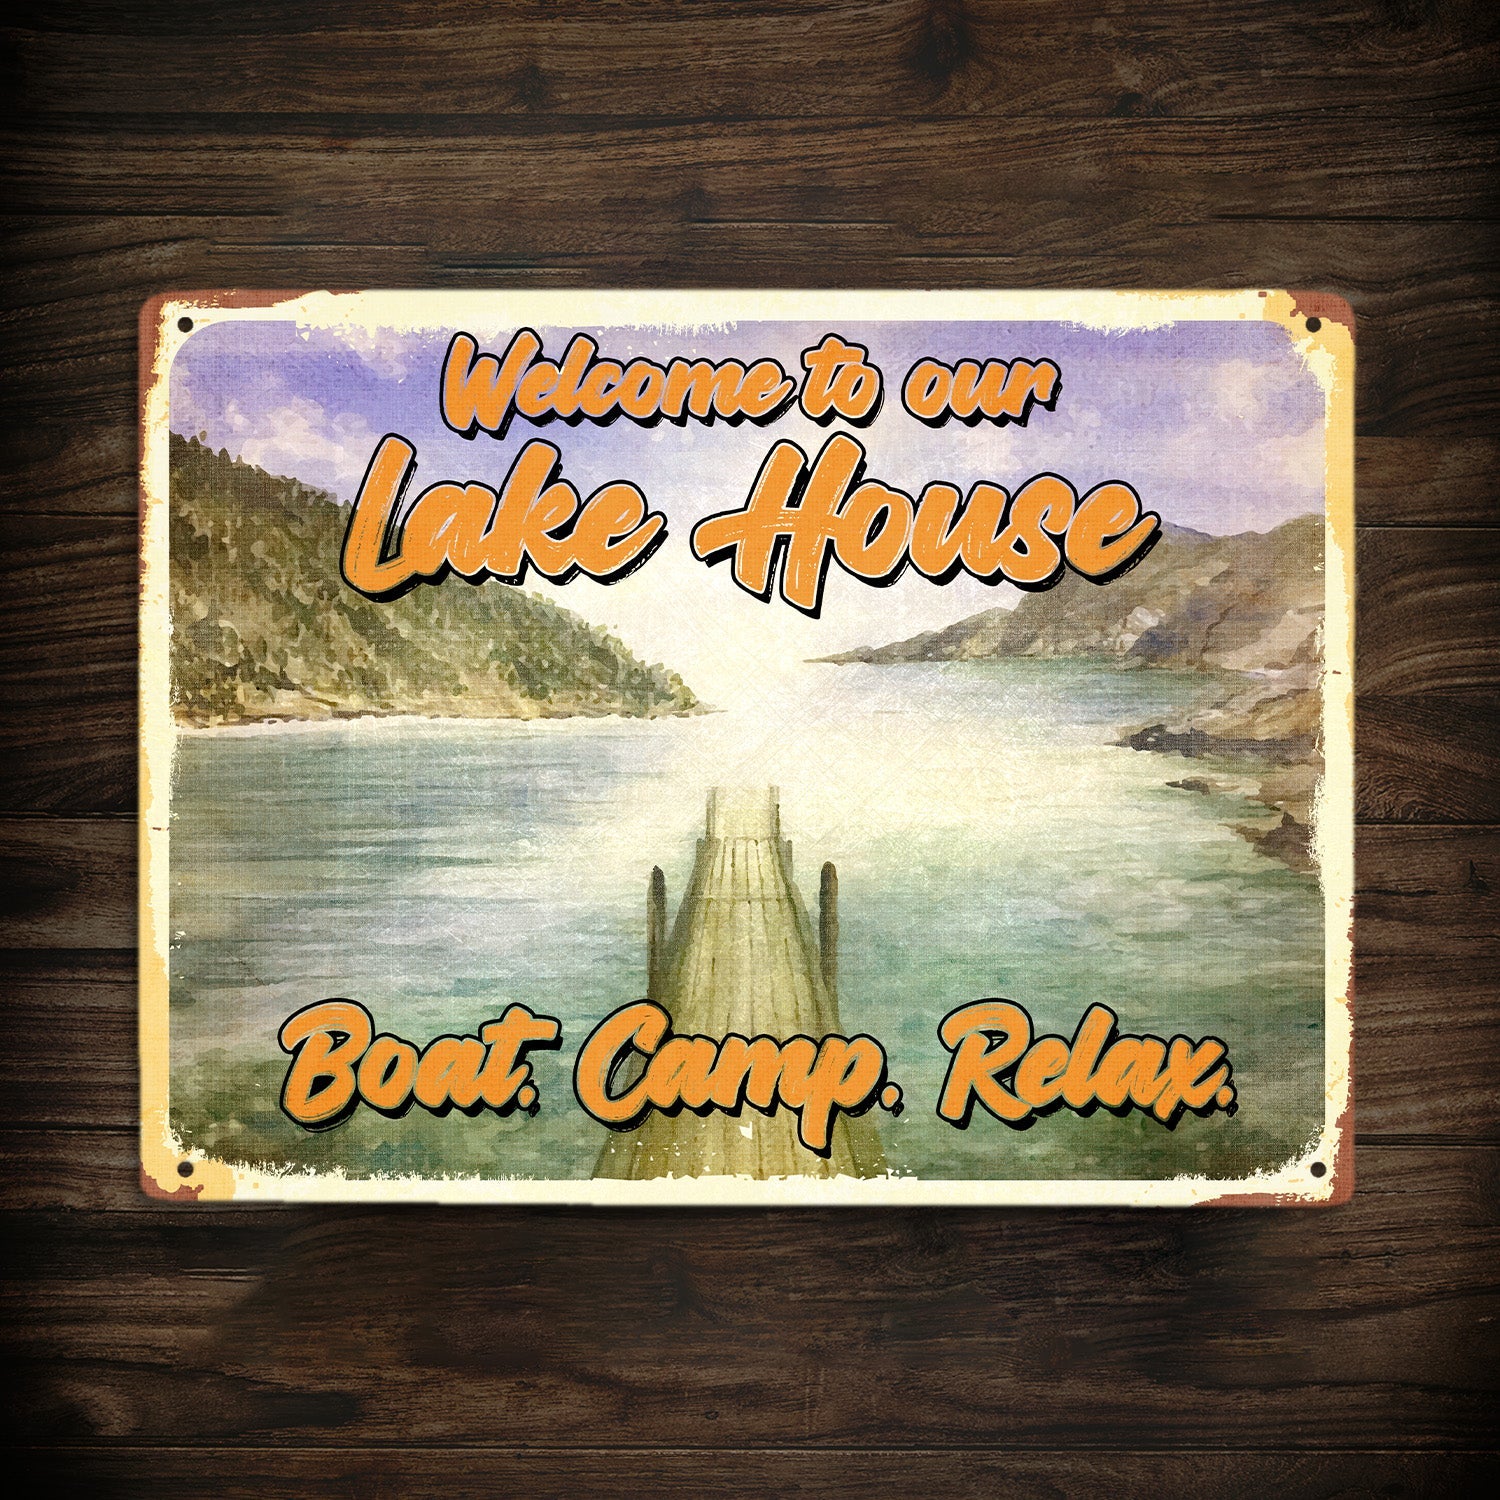 Welcome To Our Lake House, Boast, Camp, Relax